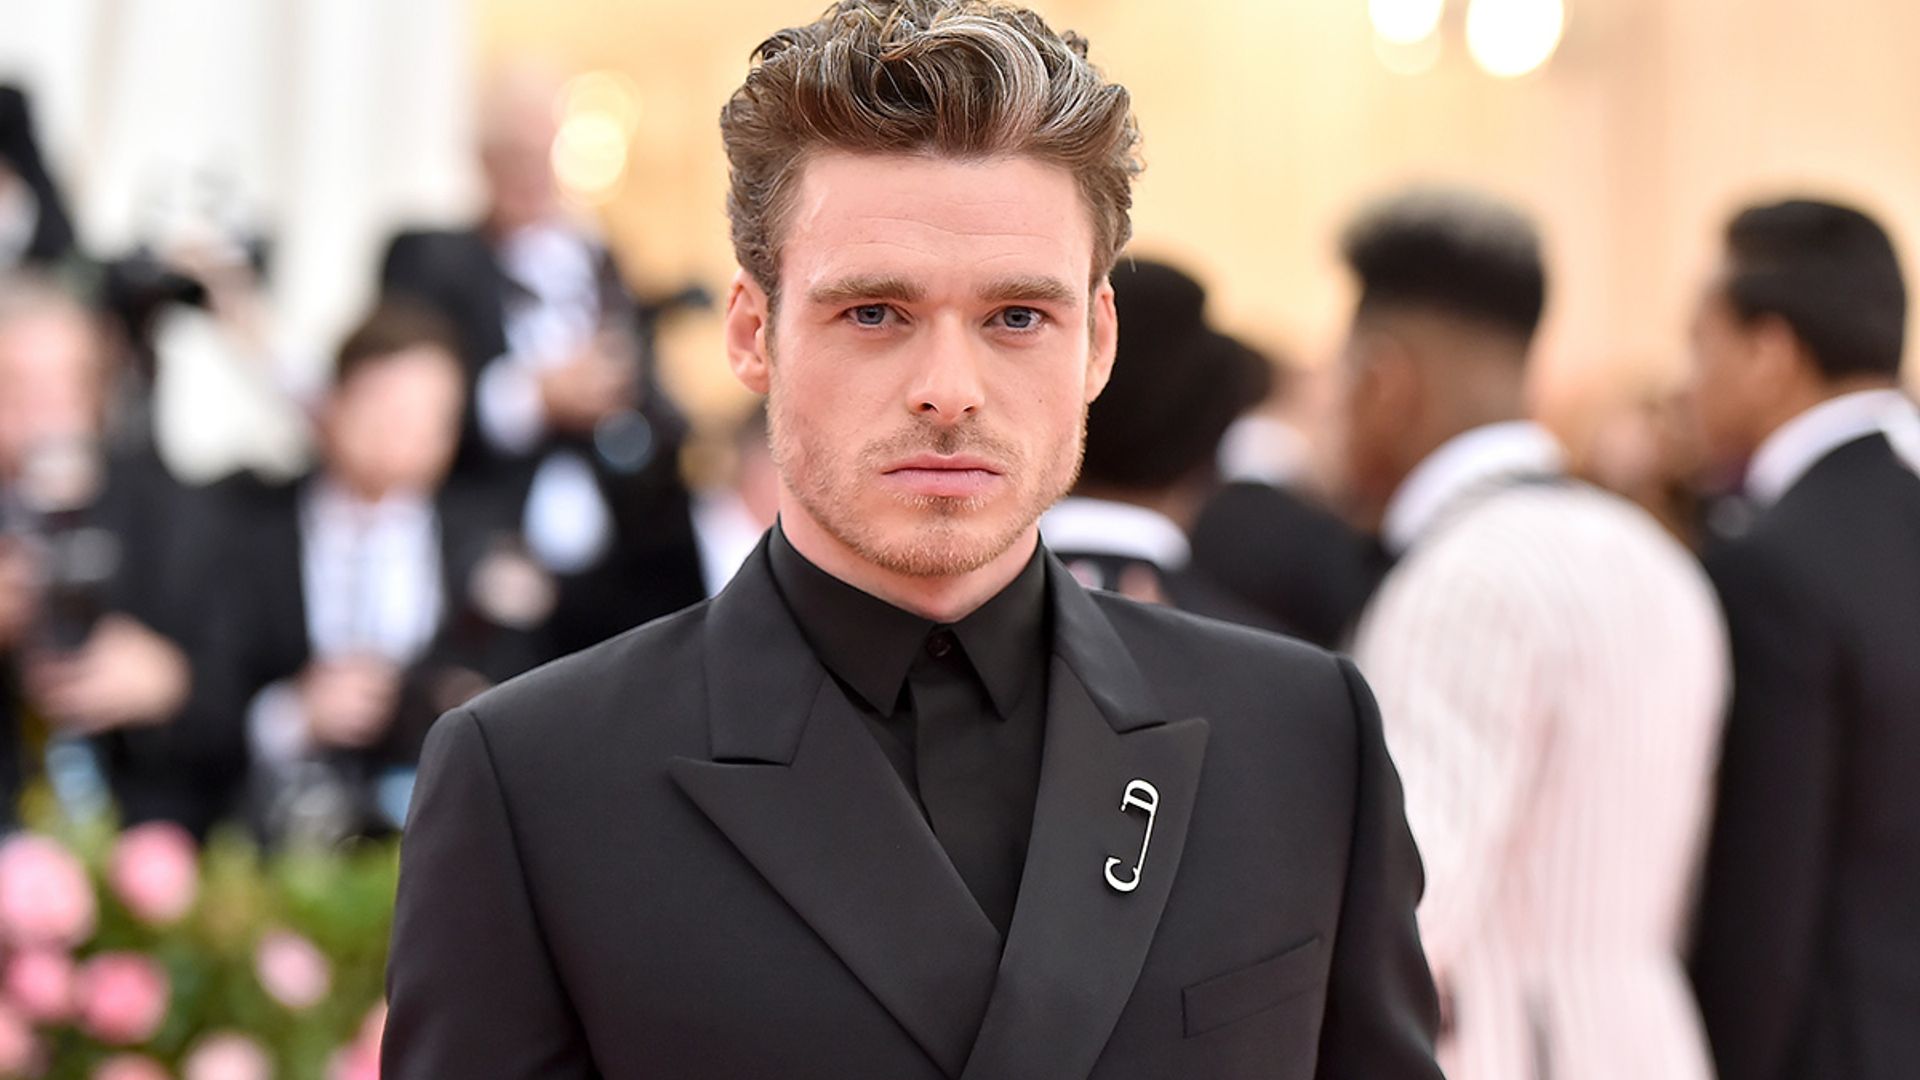 Everything you need to know about Richard Madden's love life